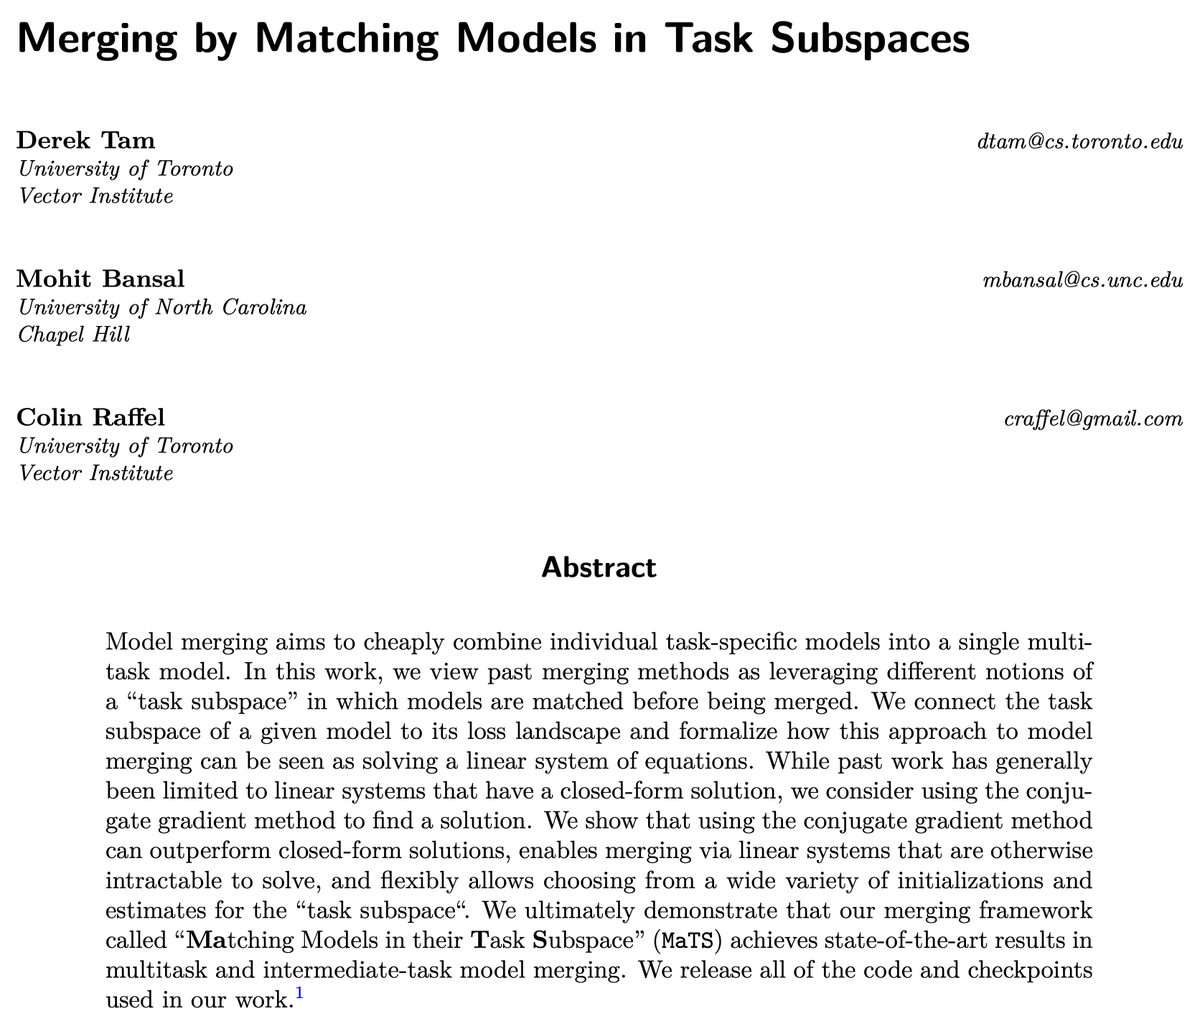 New preprint! Introducing MaTS - a new framework for merging individual task models into a multitask model by matching them in their task subspace Work done w/ @mohitban47 @colinraffel 📄 arxiv.org/abs/2312.04339 💾 github.com/r-three/mats 🧵 ⬇️